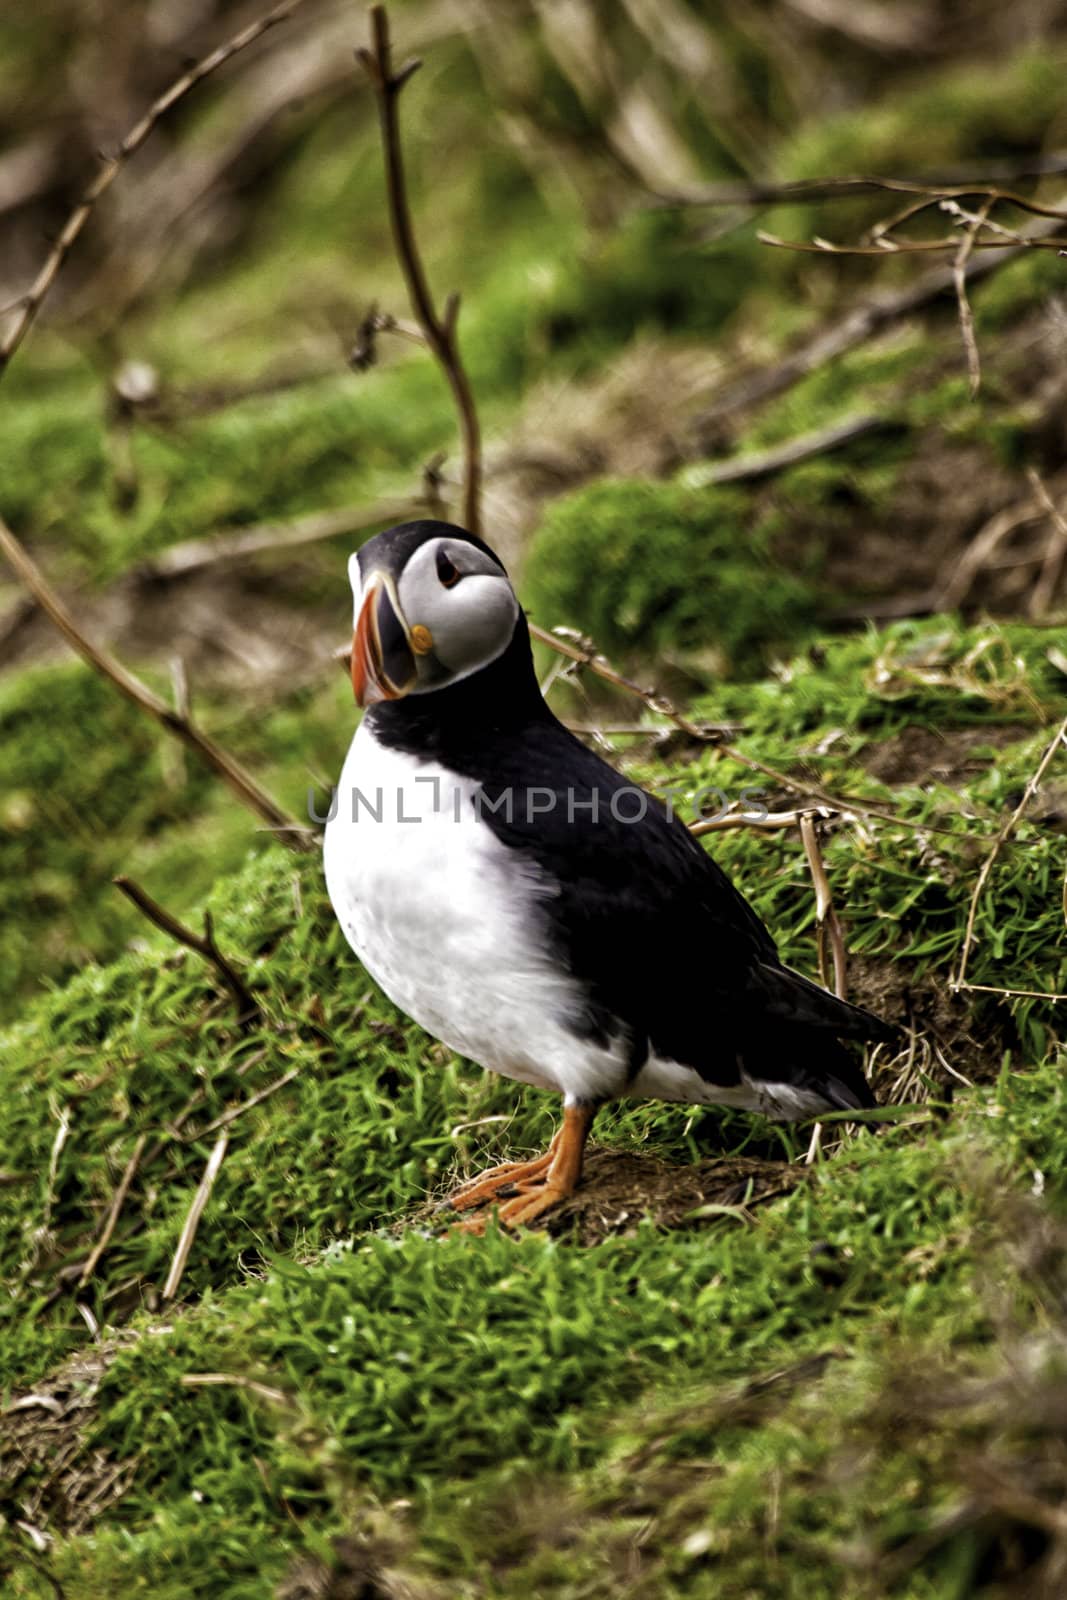 Puffin on a grassy slope by jrock635